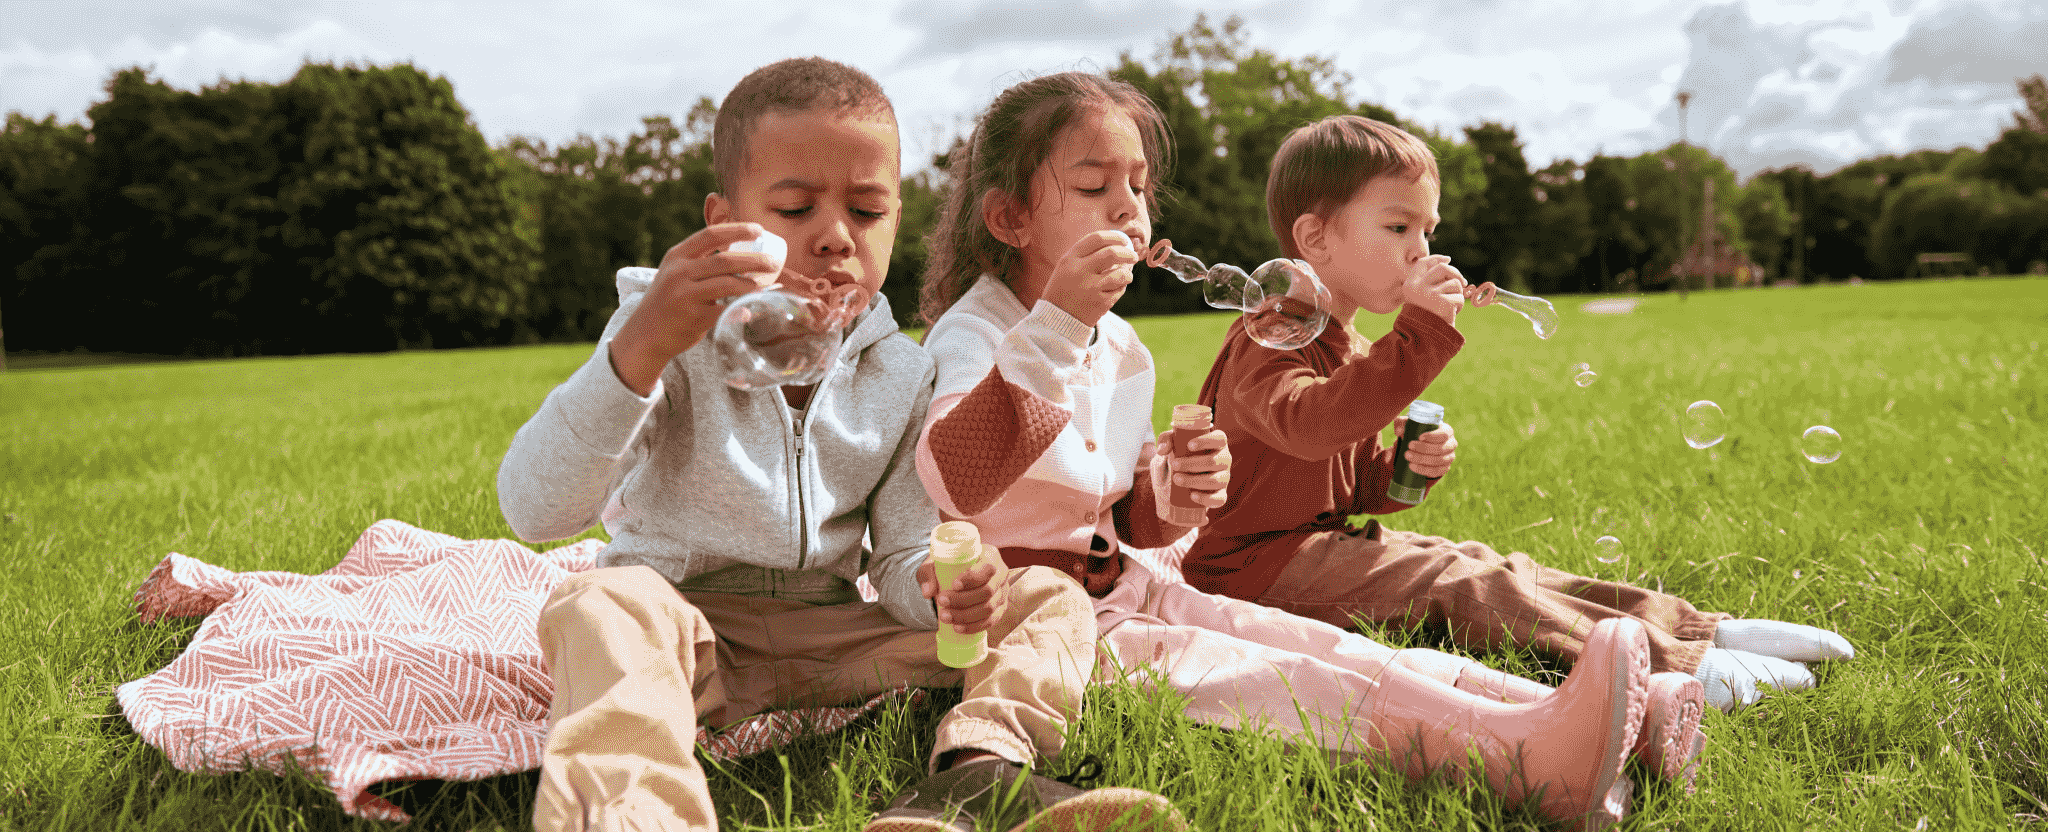 A group of happy children play outside, blowing bubbles.